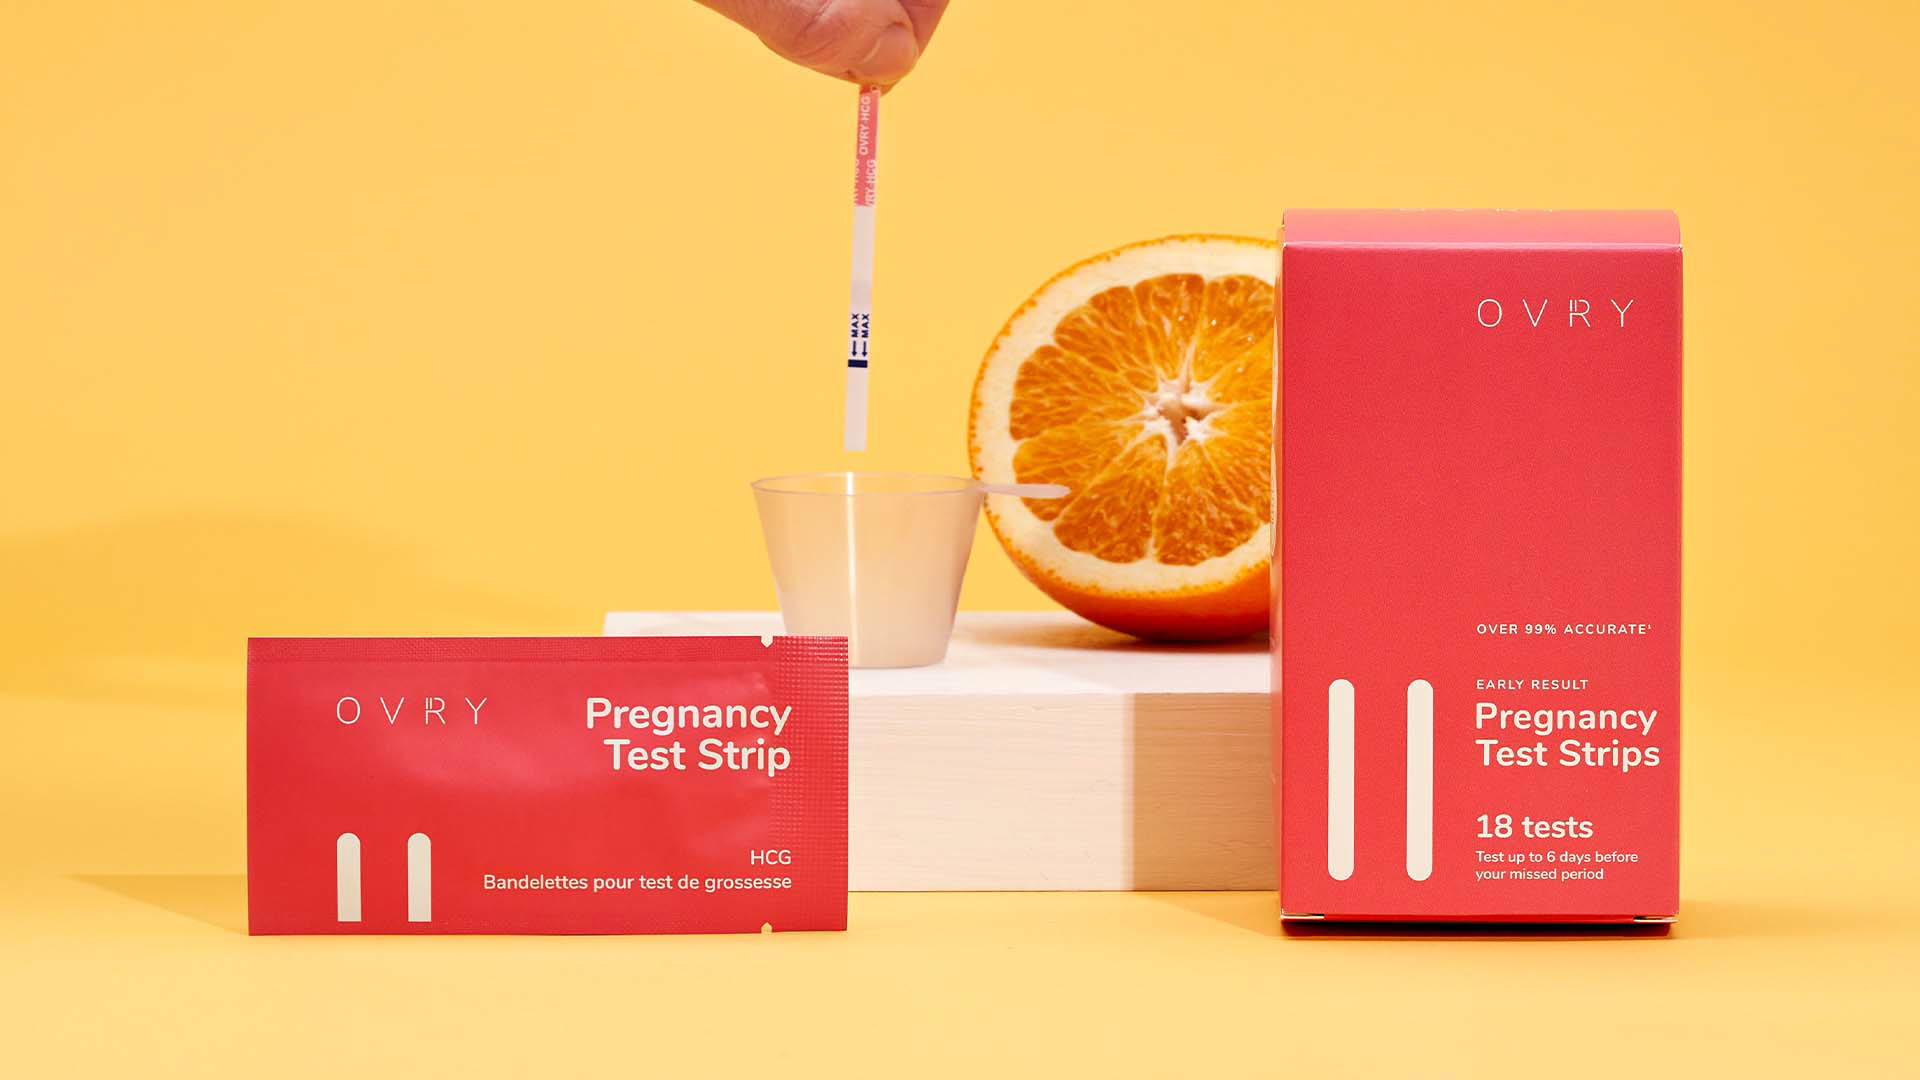 Ovry reproductive health products